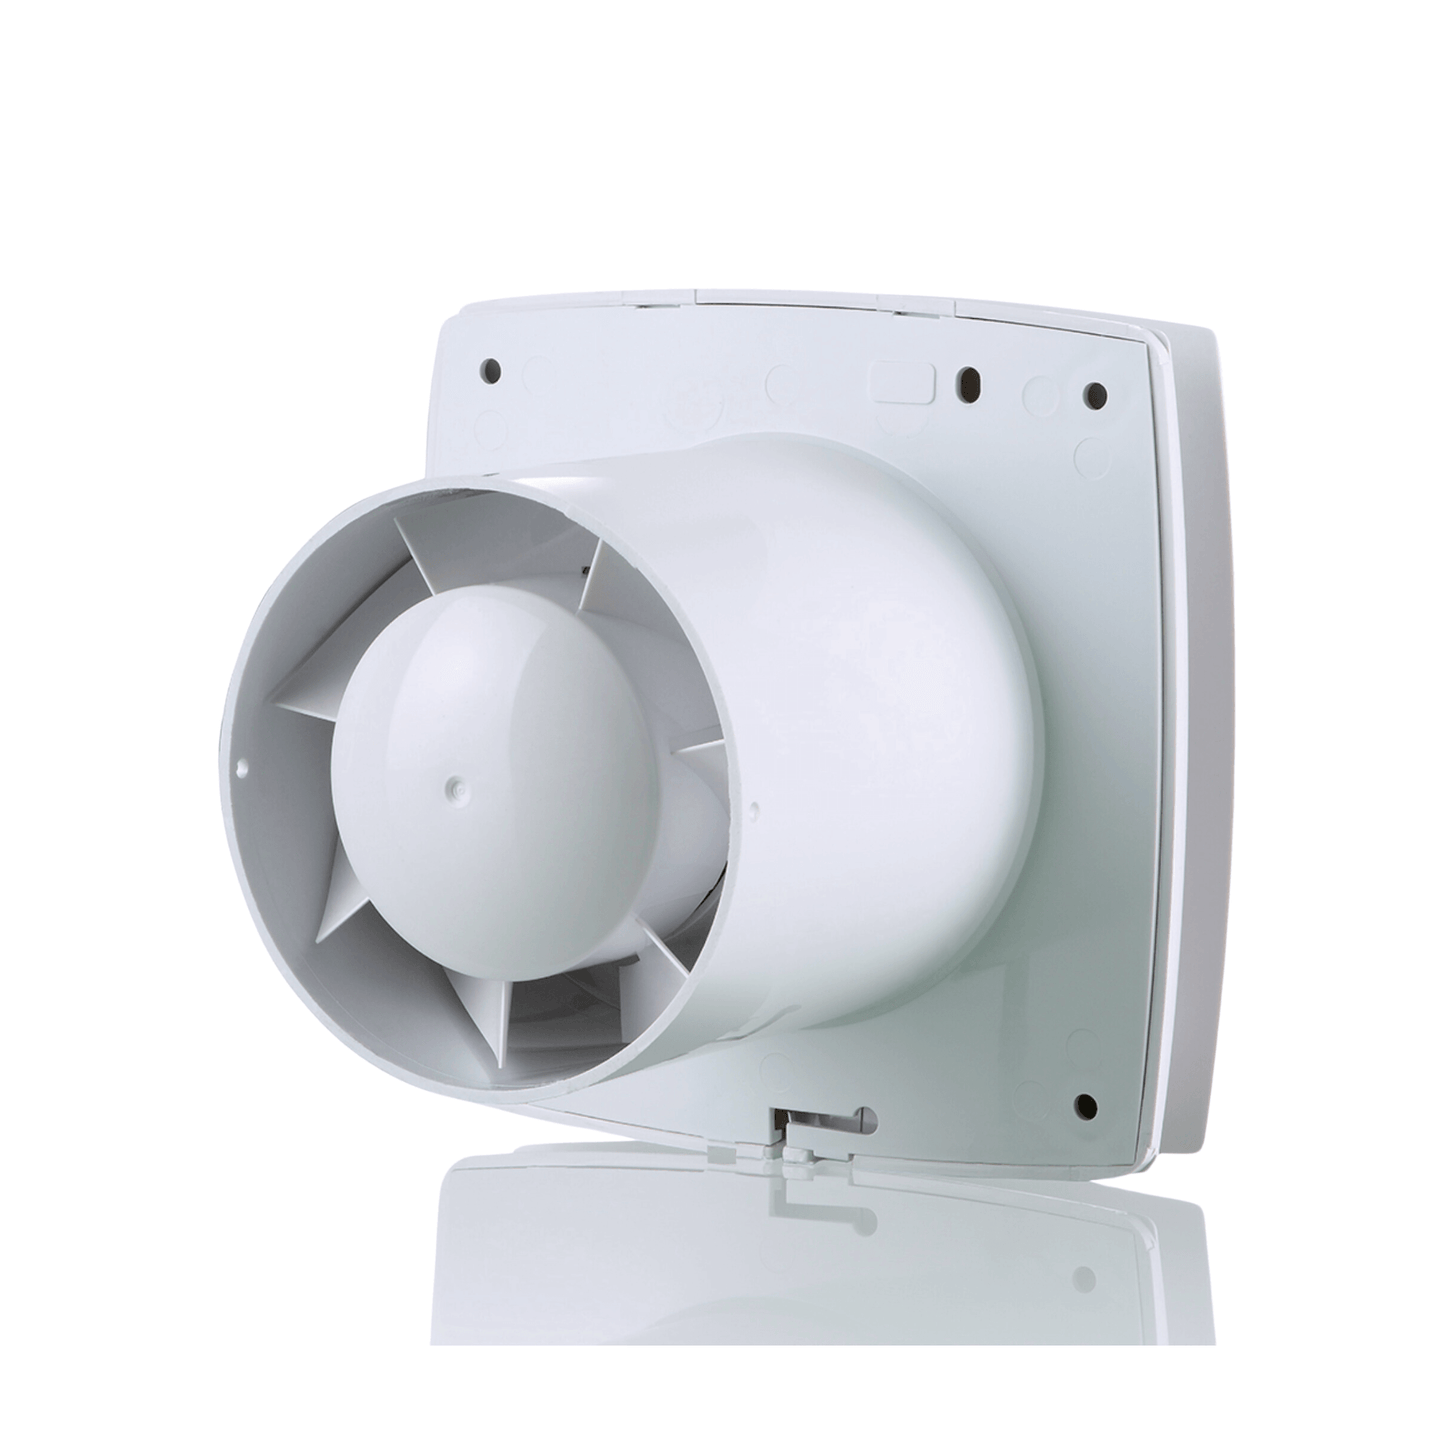 Vents 150 LD Axial Extract Fan